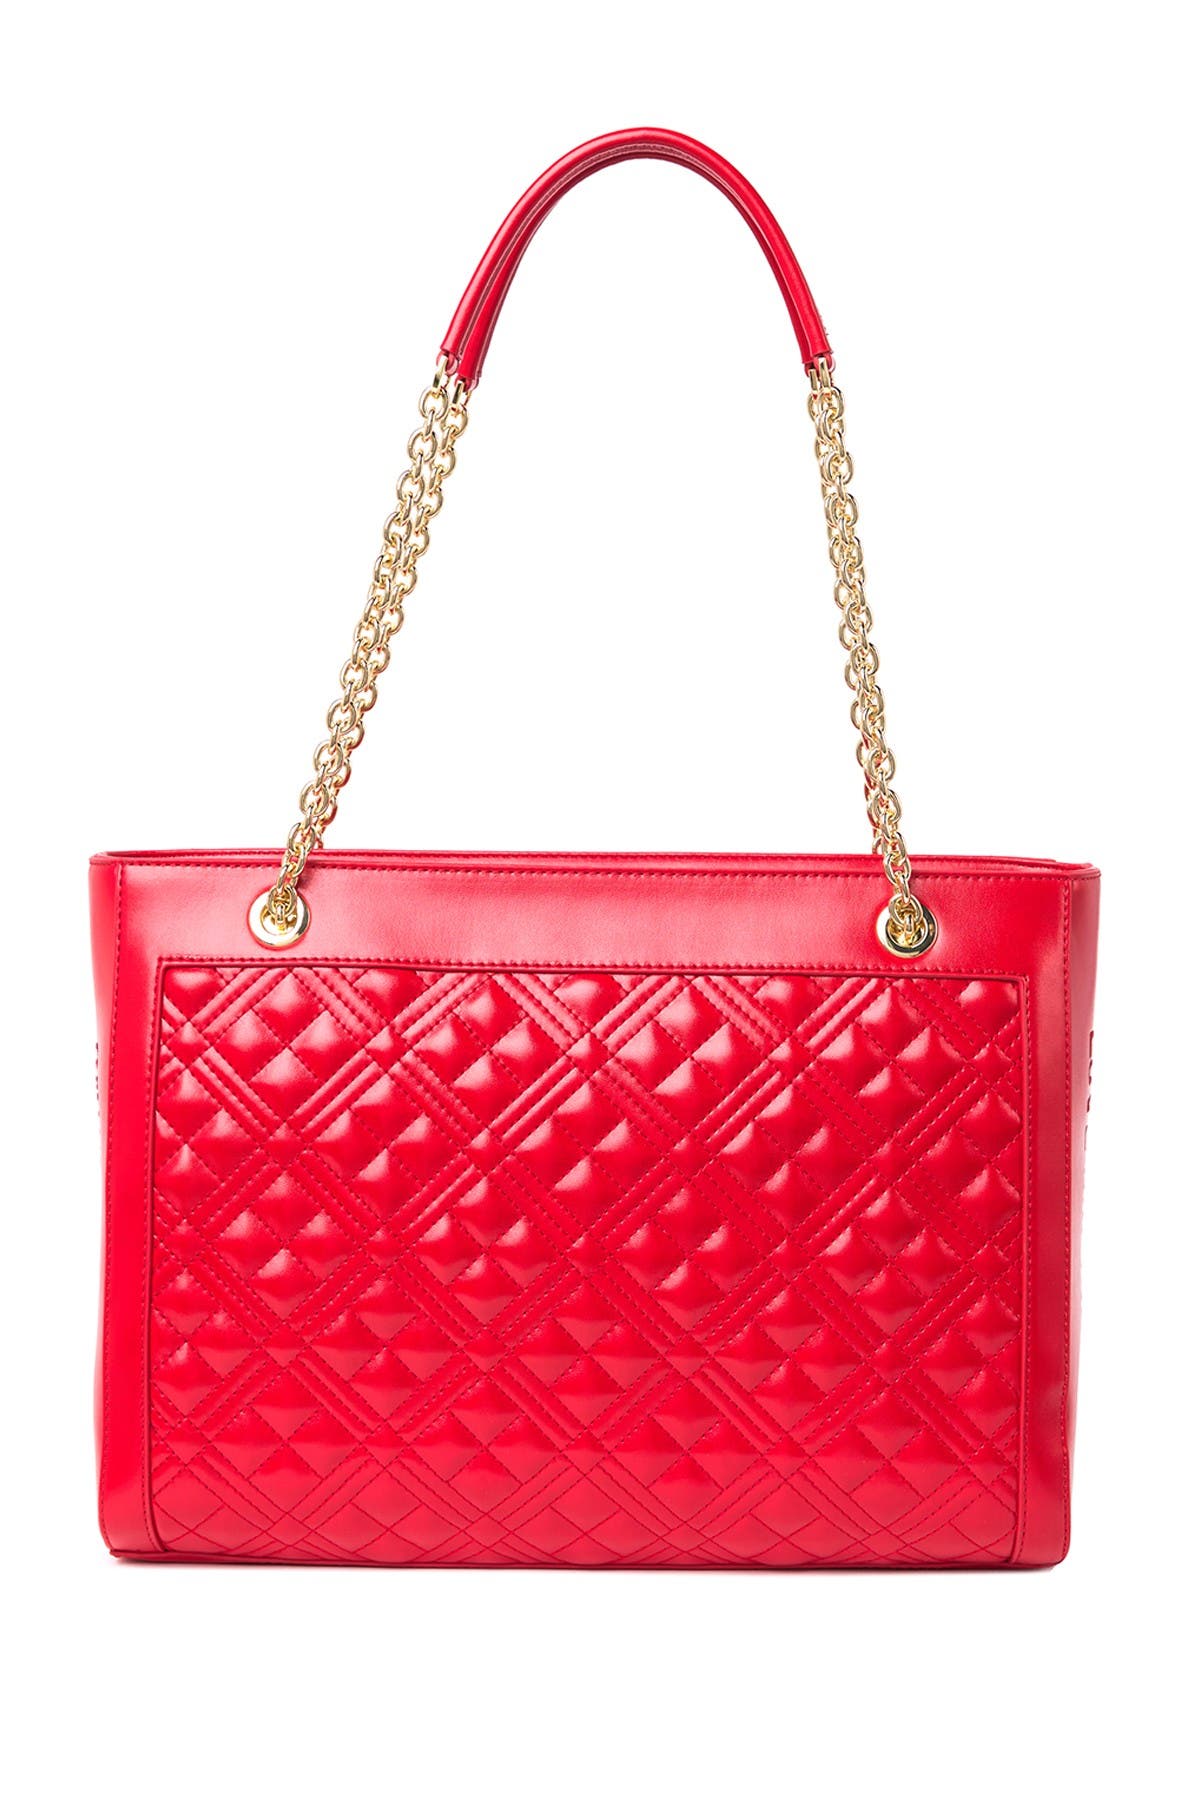 love moschino borsa quilted nappa